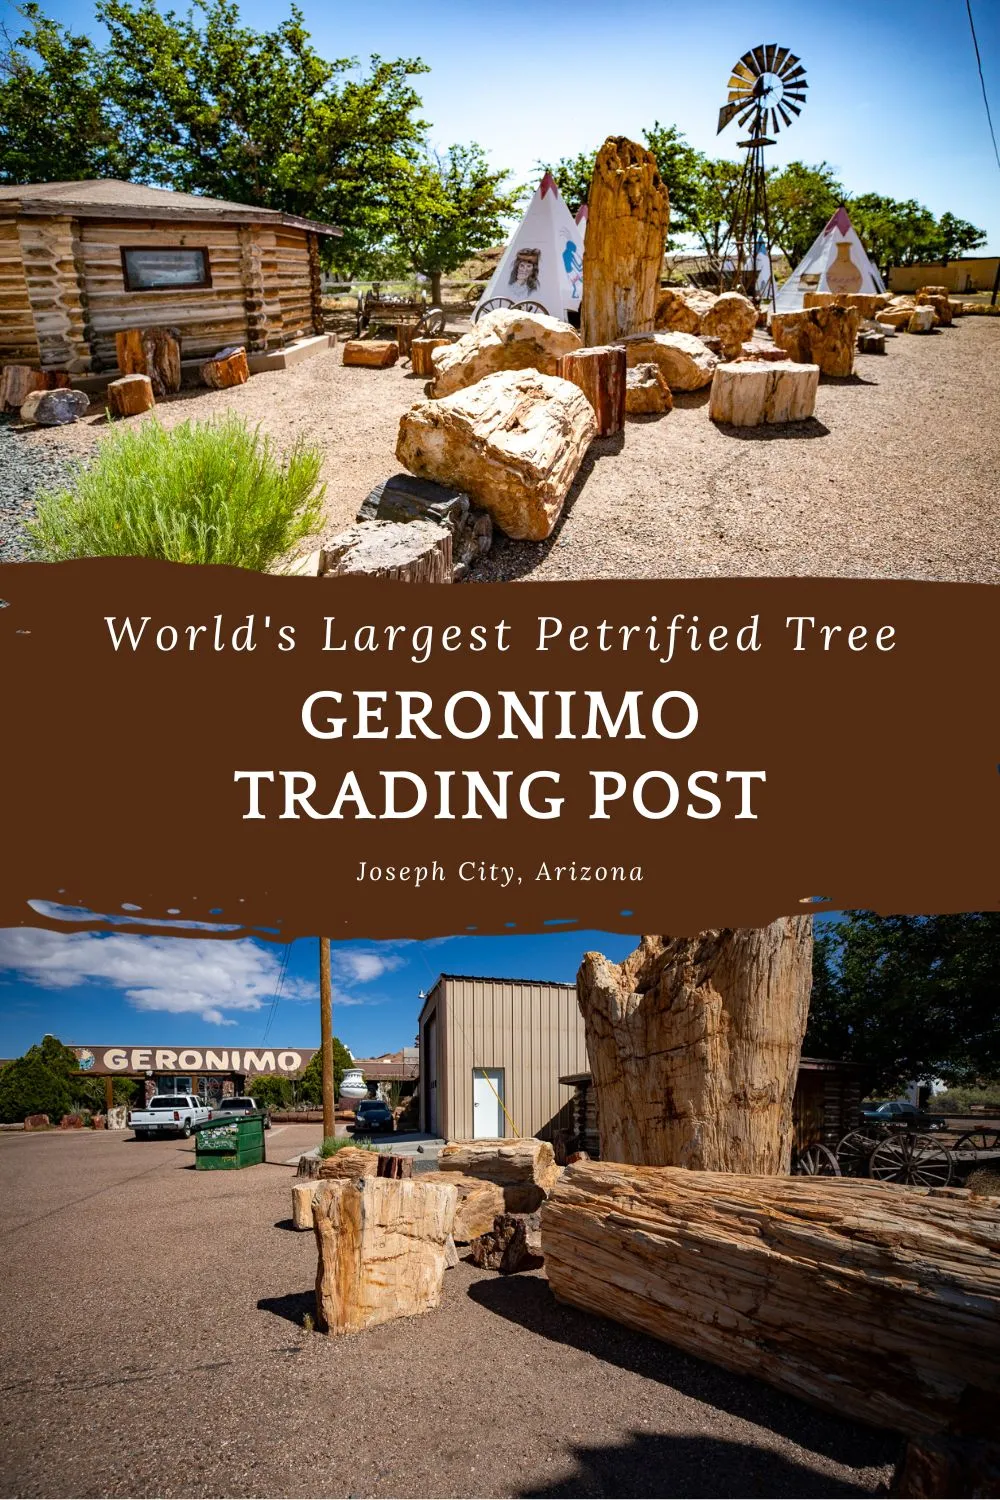 Geronimo Trading Post in Joseph City, Arizona has been open since 1974. Inside find Route 66 souvenirs alongside local crafts and other unique mementos. Outside find petrified trees, teepees, big pottery, and the World's Largest Petrified Tree. Find the 80-ton, ten-foot tall stump in several pieces among the other miscellany outside. Visit this Route 66 roadside attraction on your Arizona road trip! #Route66 #Route66RoadTrip #RoadsideAttraction #ArizonaRoadTrip #Arizona